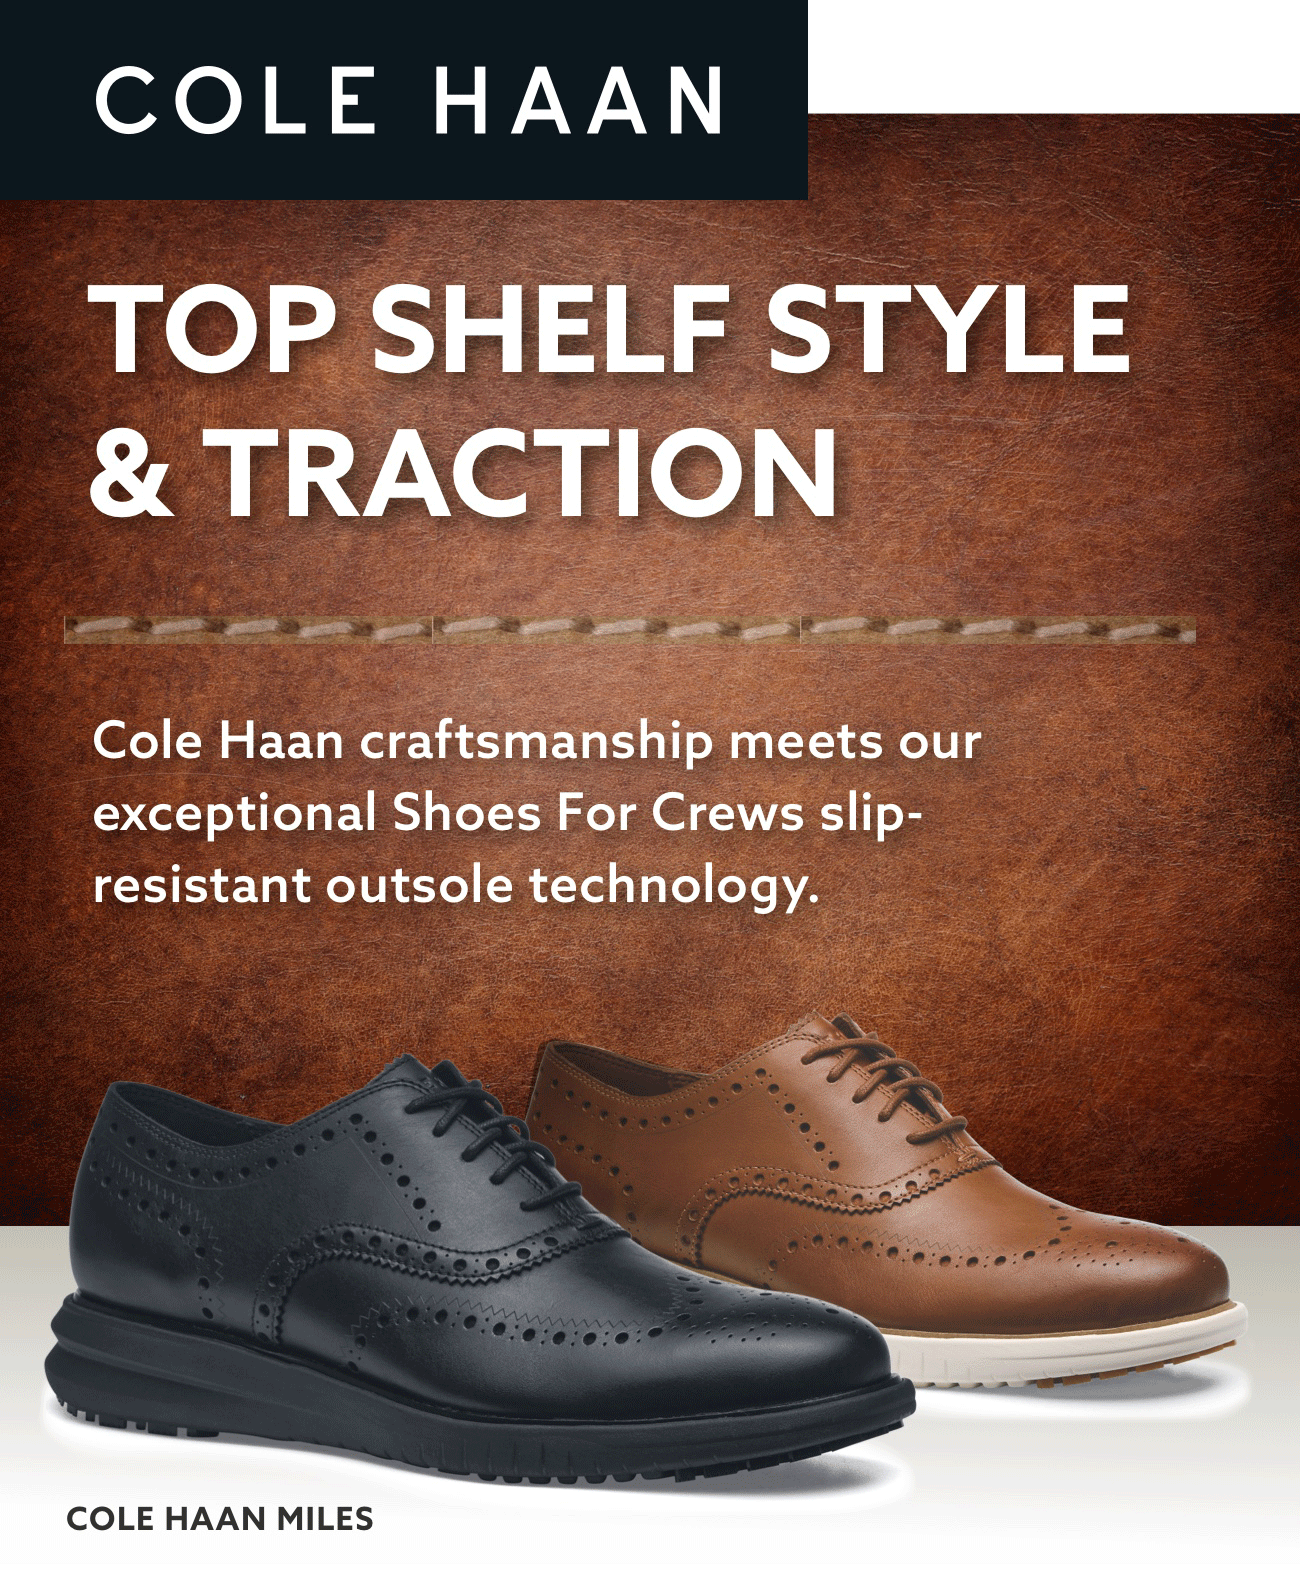 Cole Haan Top Shelf Style & Traction